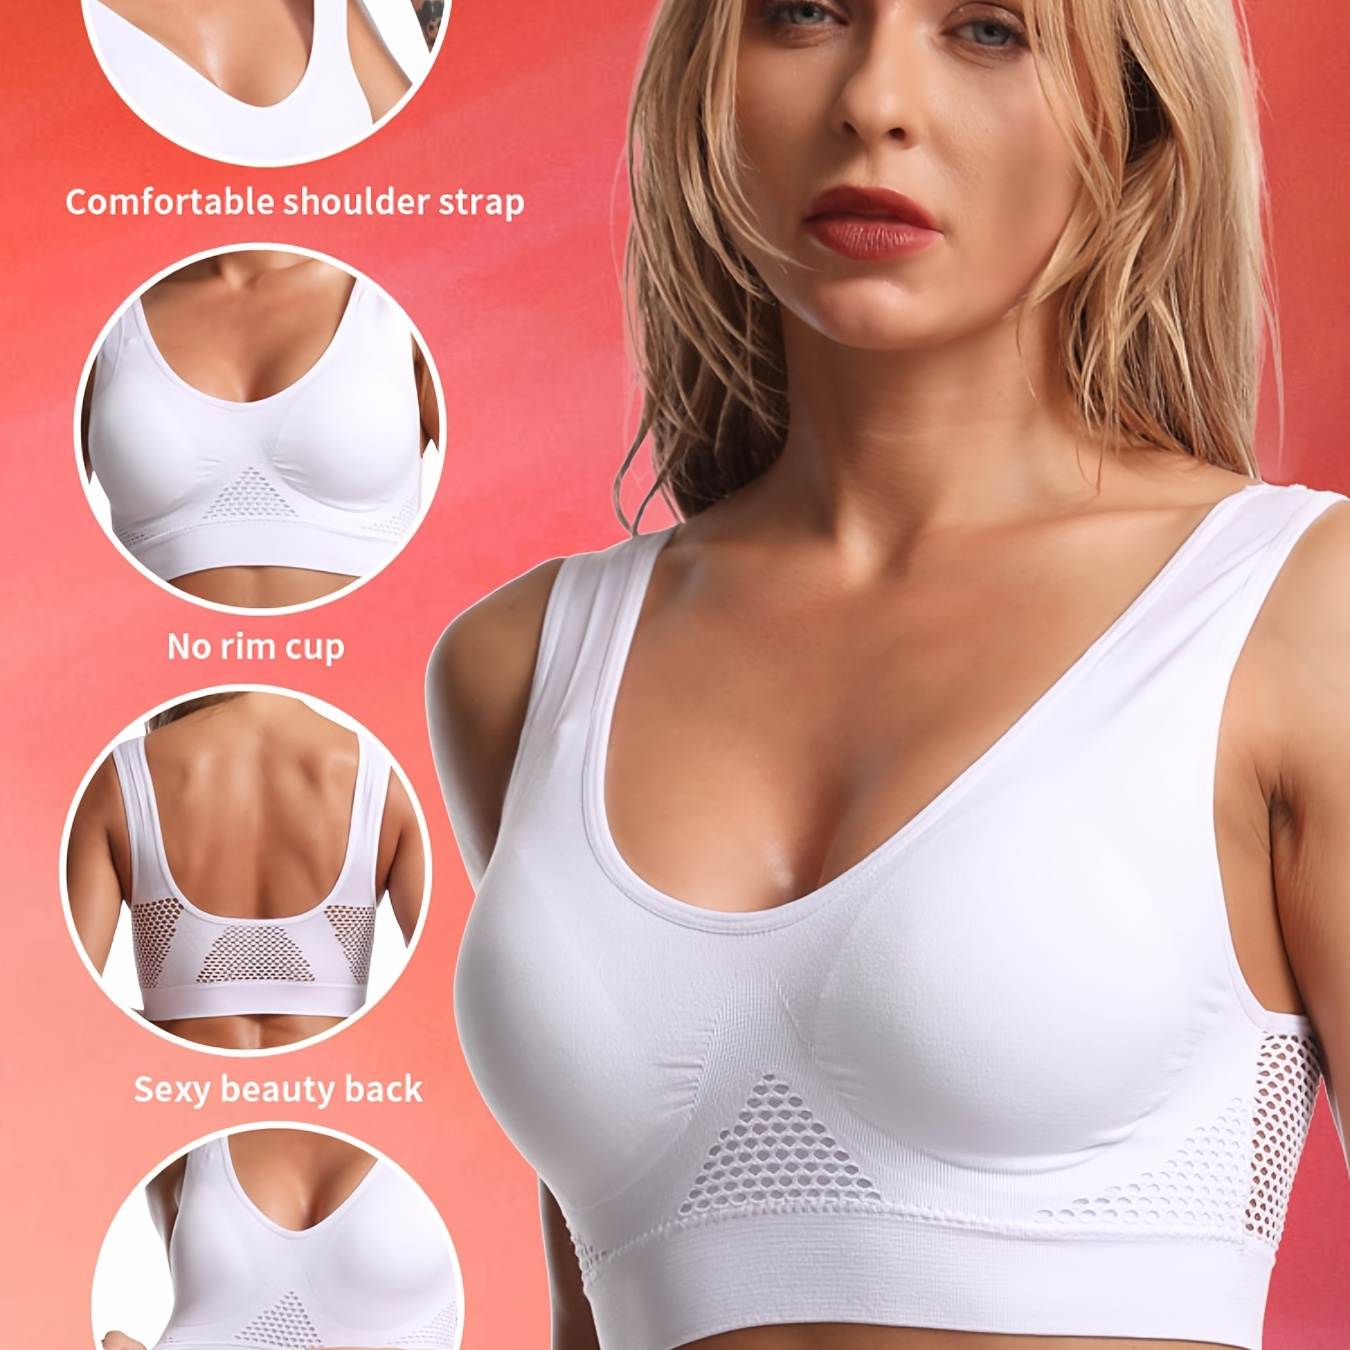 M J Online Shopping - new designs padded bra soft stuff. Size Available. 32, 34,36,38,40 Price. 650/- Whatsapp. 03355137151